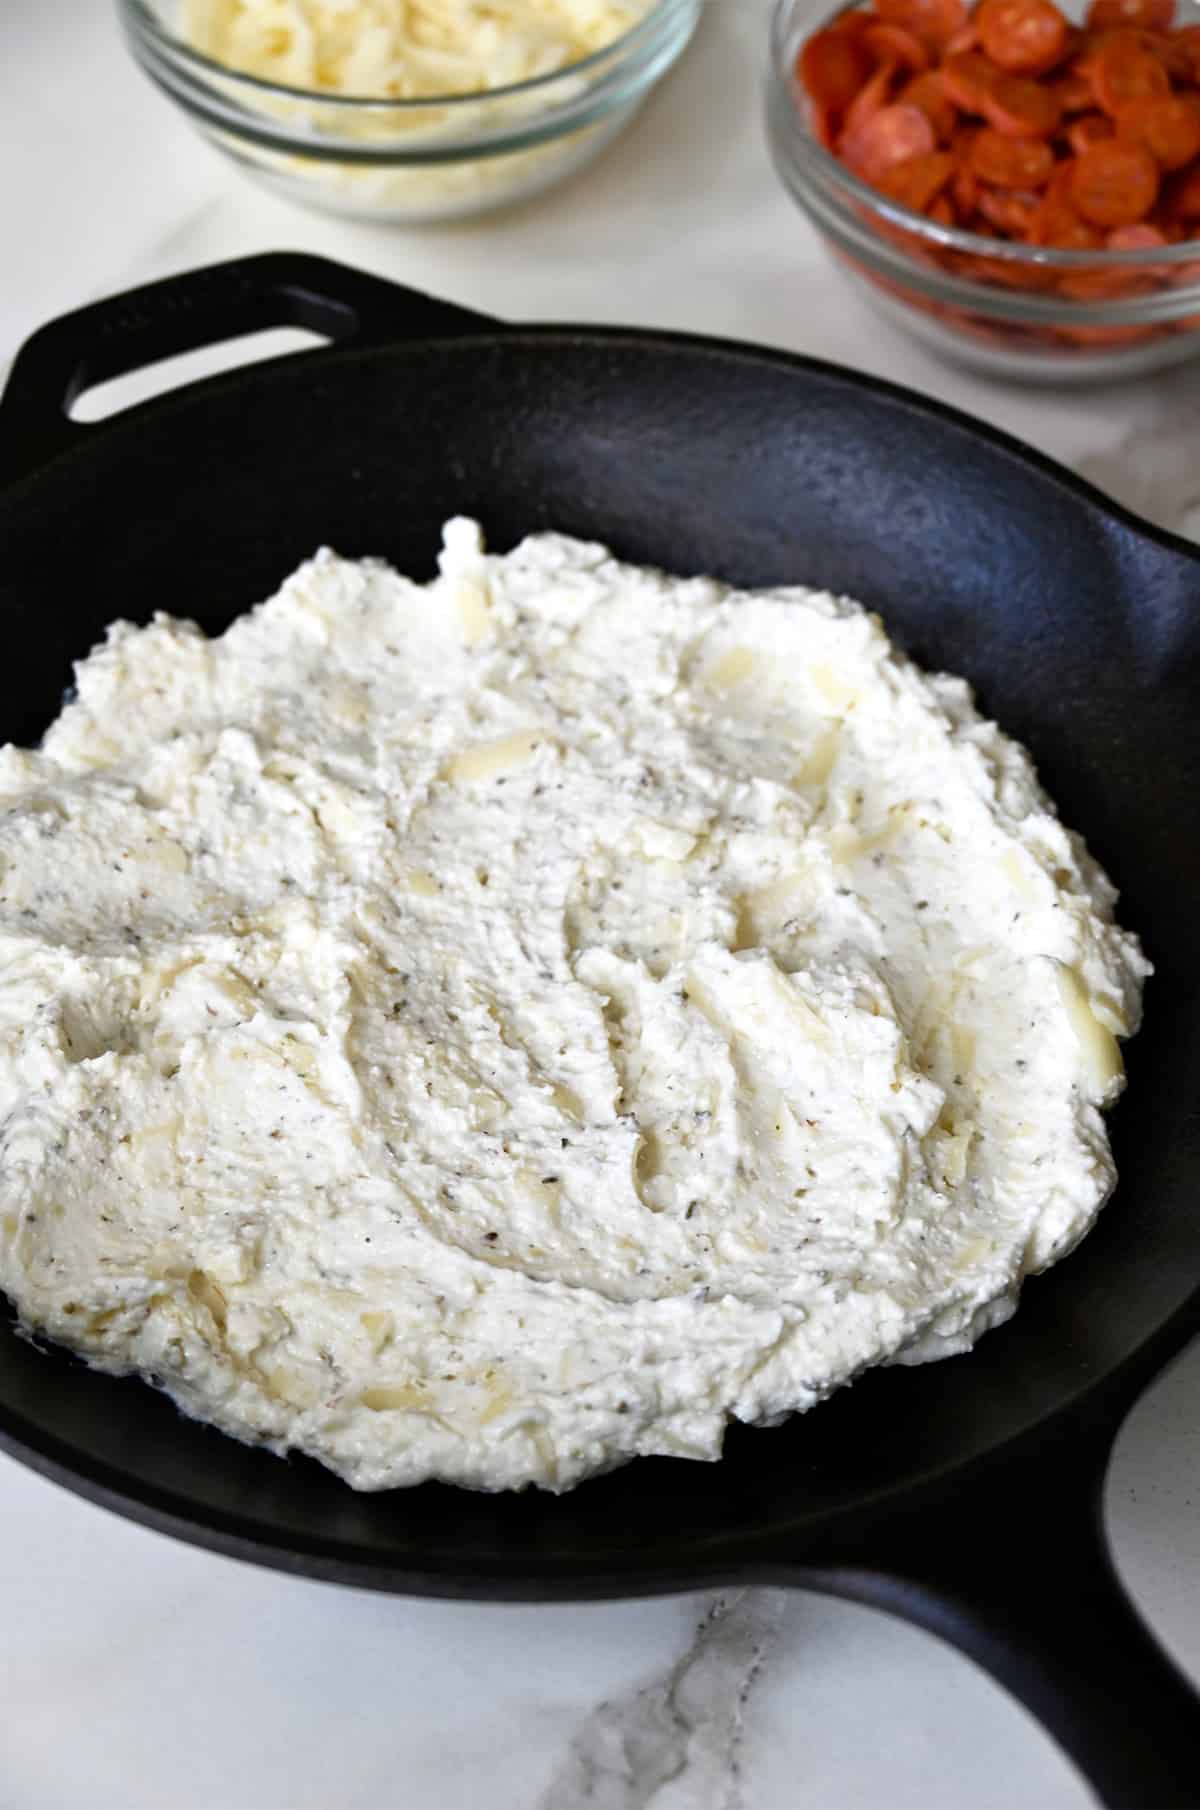 A cheese mixture spread on the bottom of a cast iron skillet.